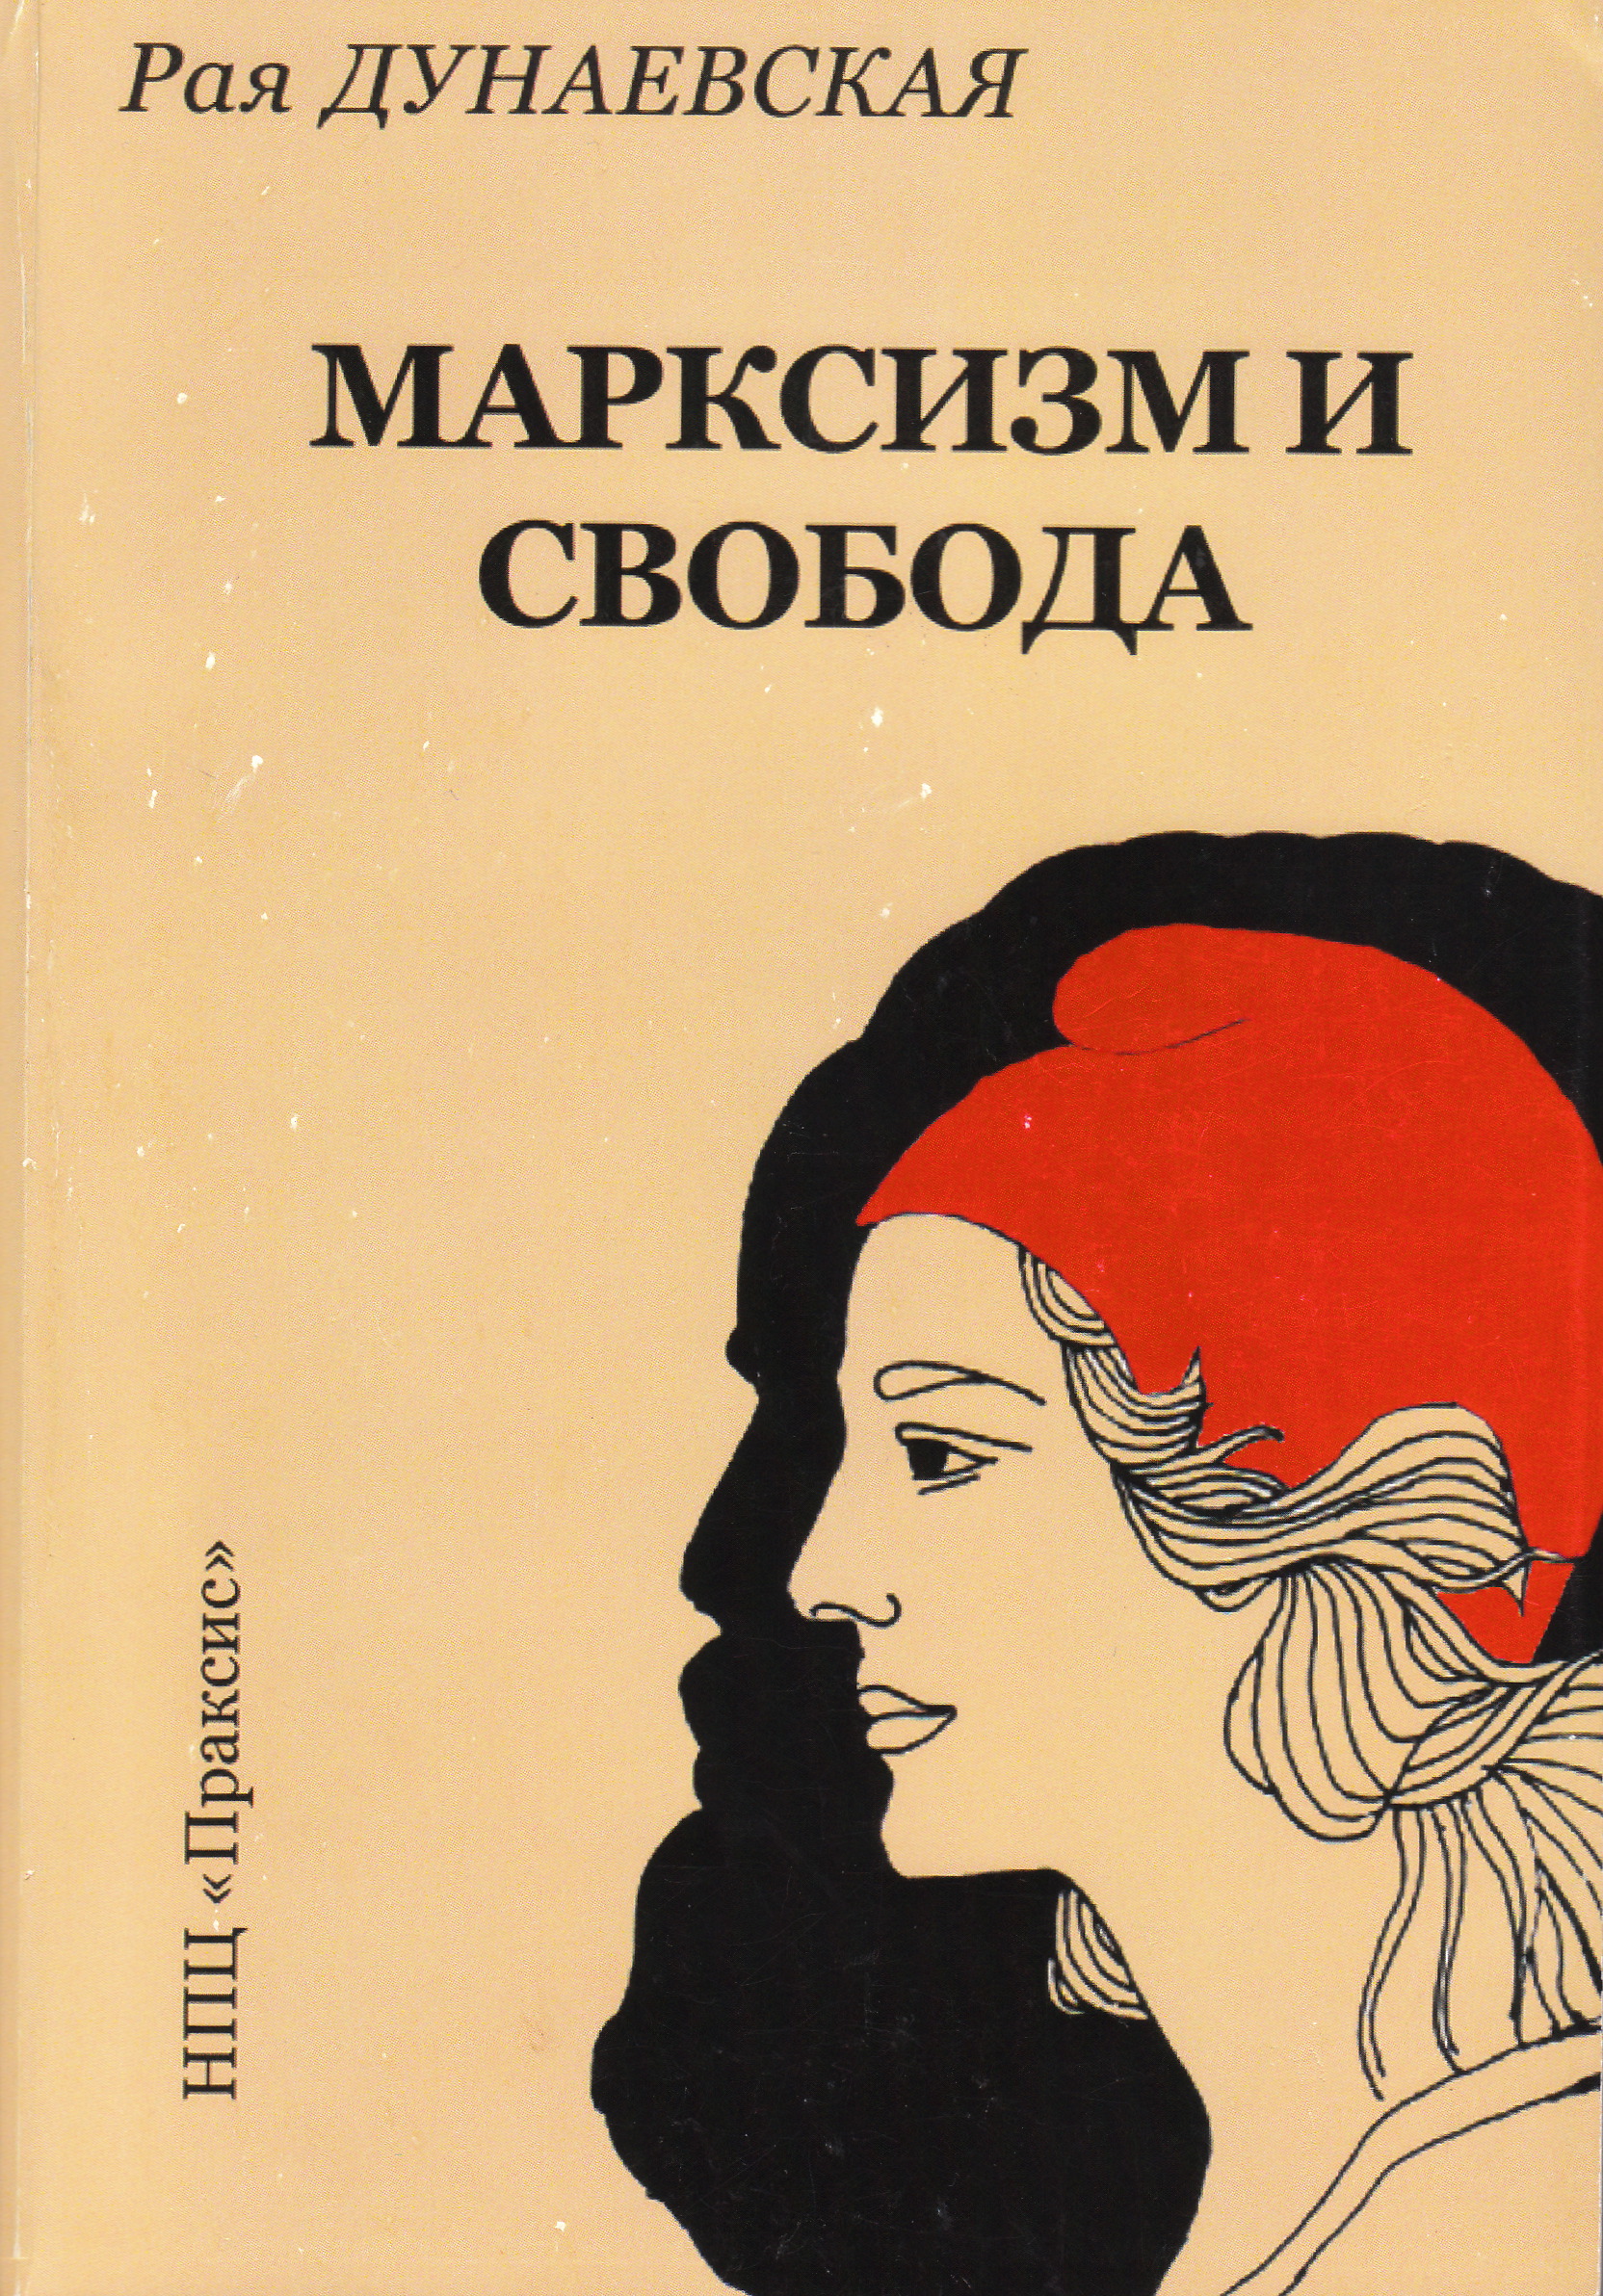 Russian Marxism and Freedom